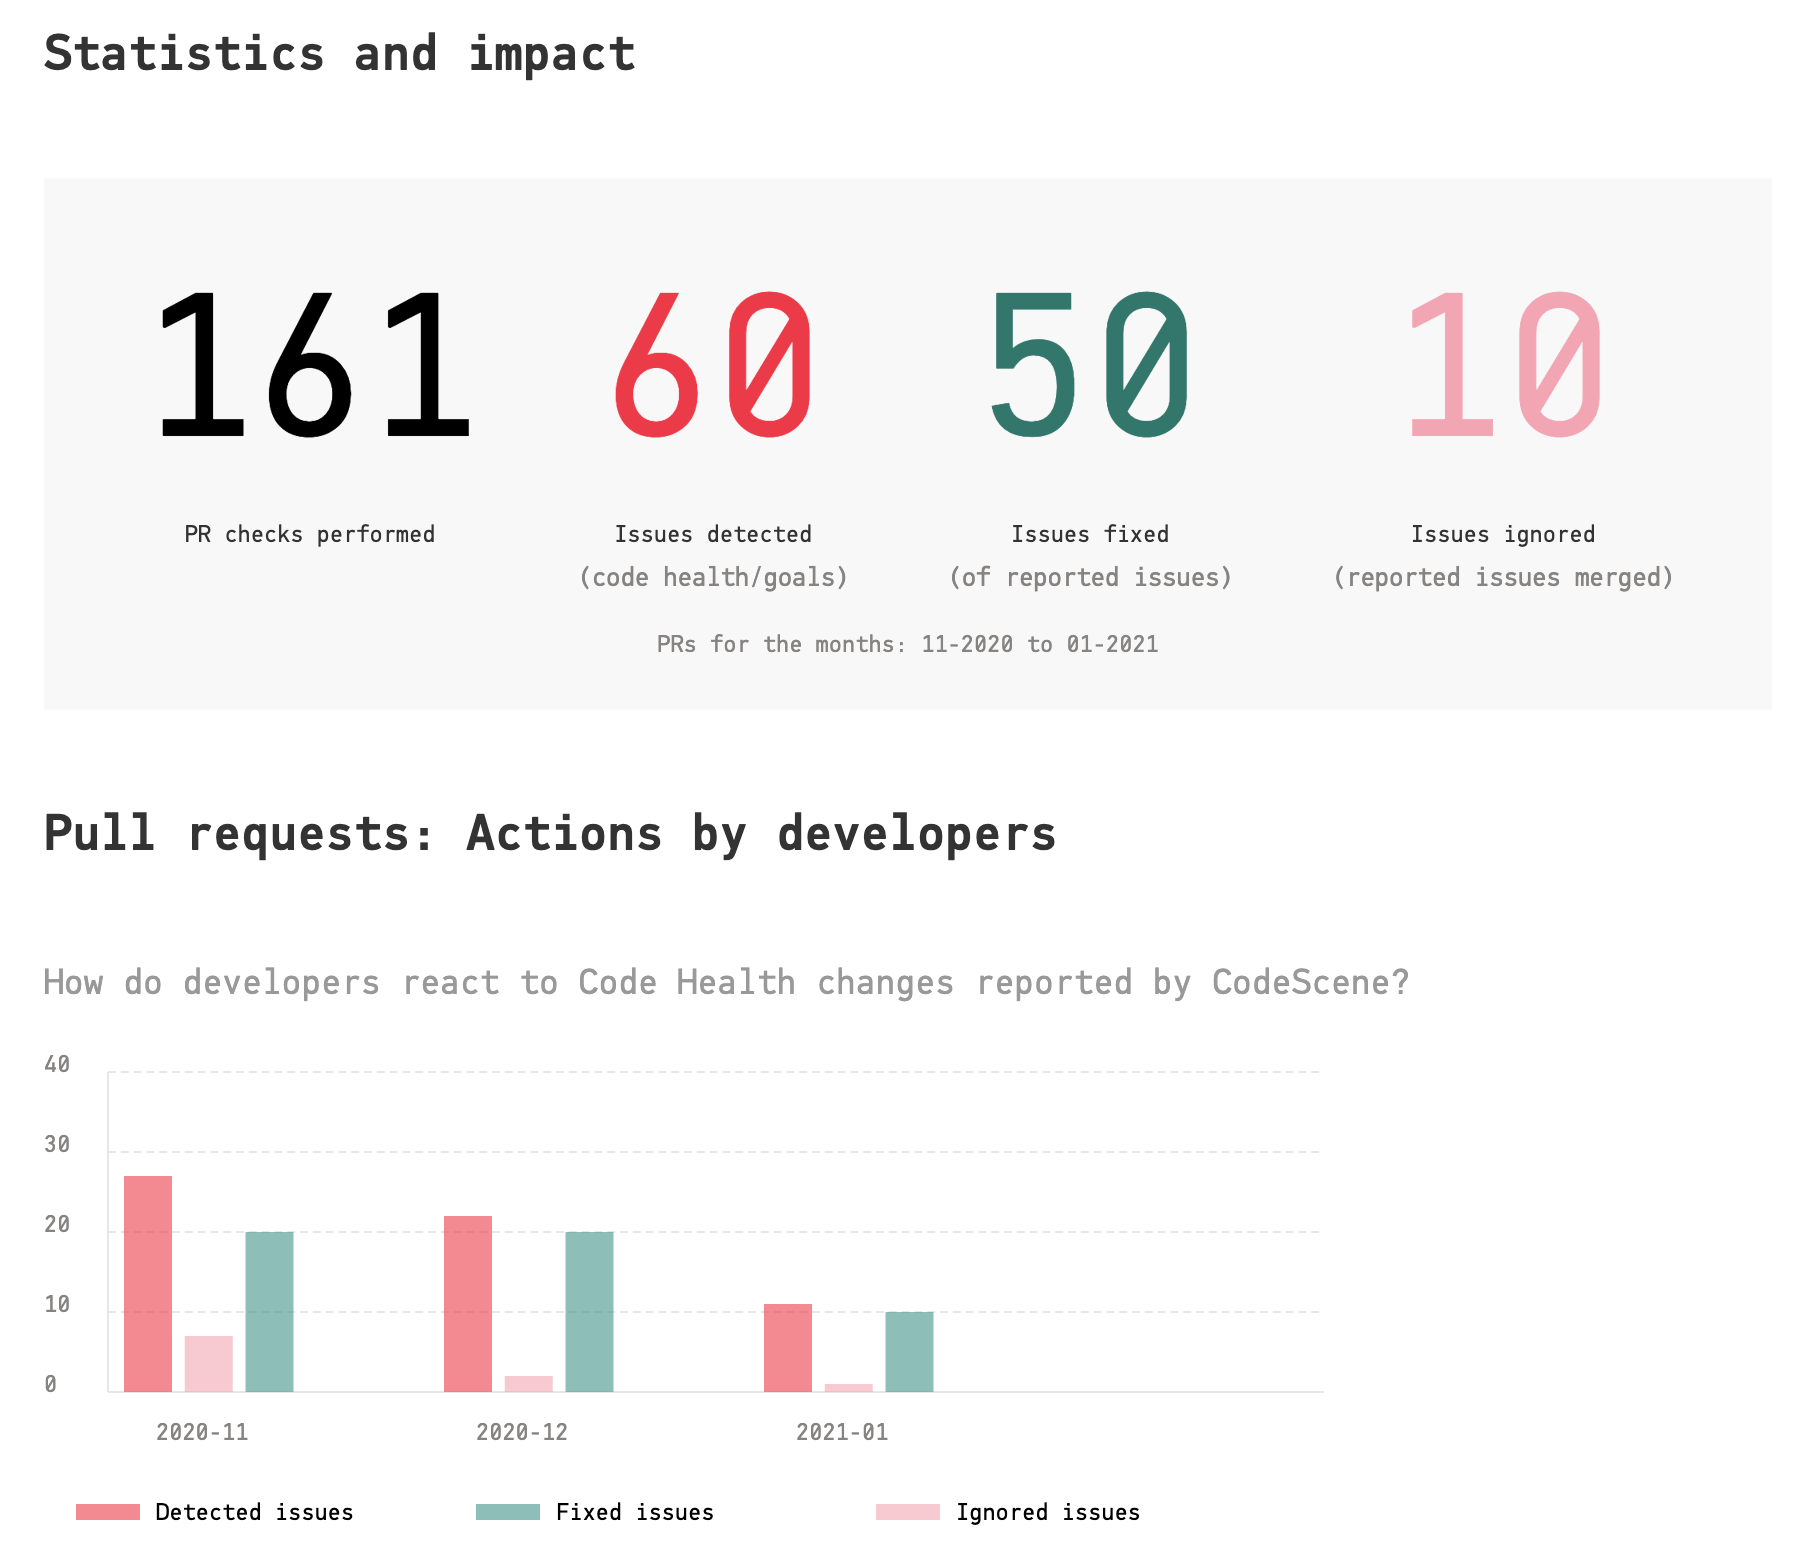 View the impact and developer action due to the pull request integration.